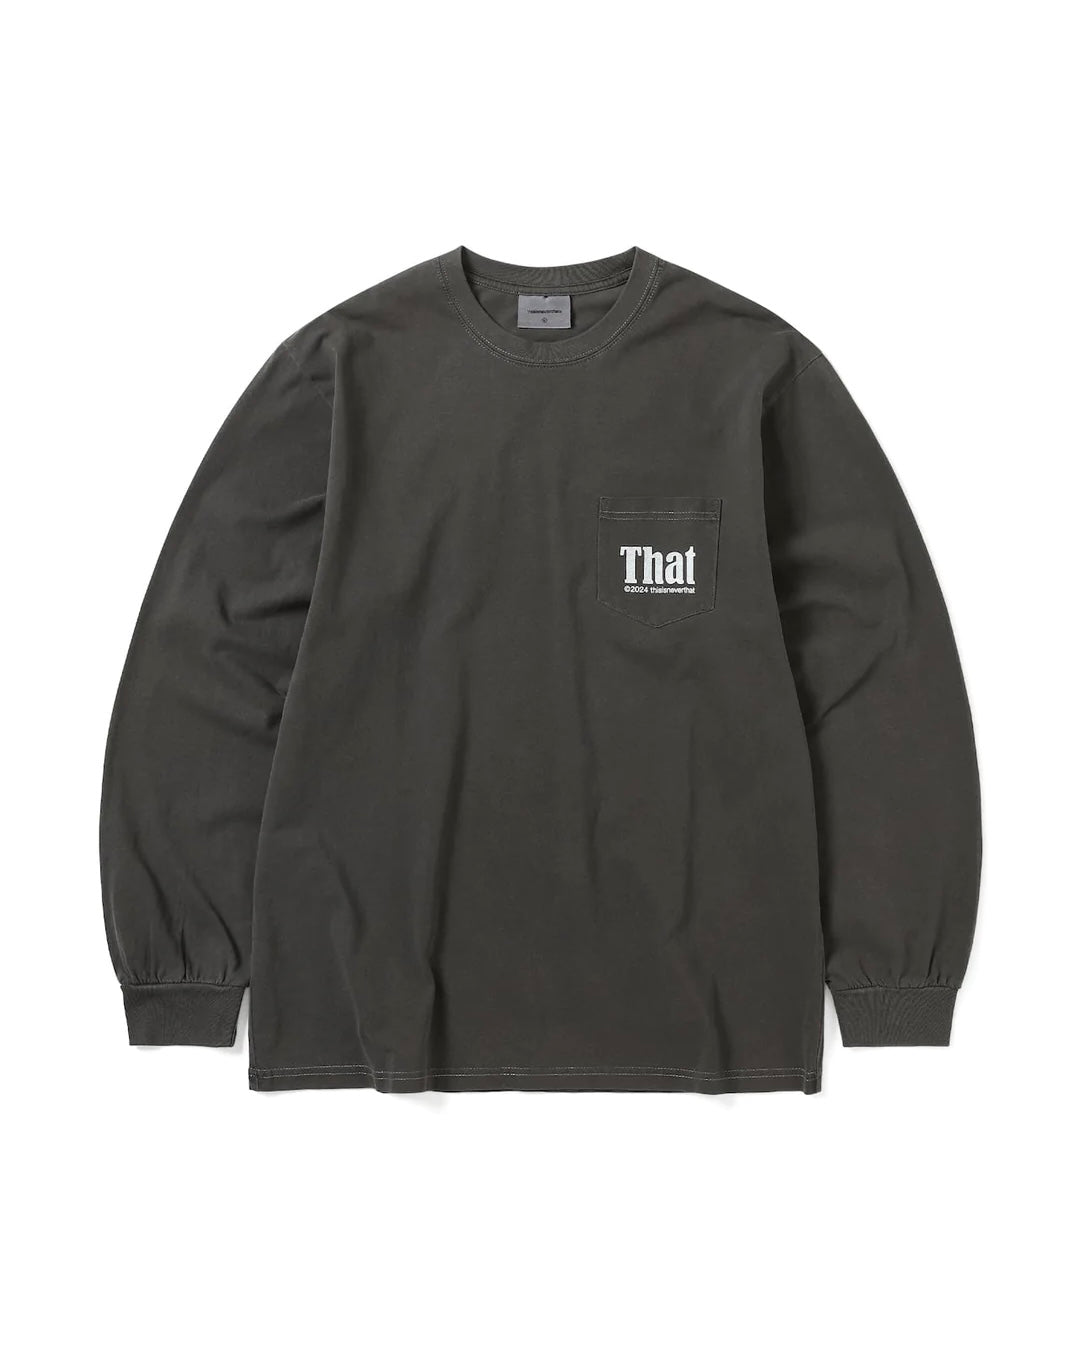 【THISISNEVERTHAT】THAT POCKET L/S TEE - CHARCOAL